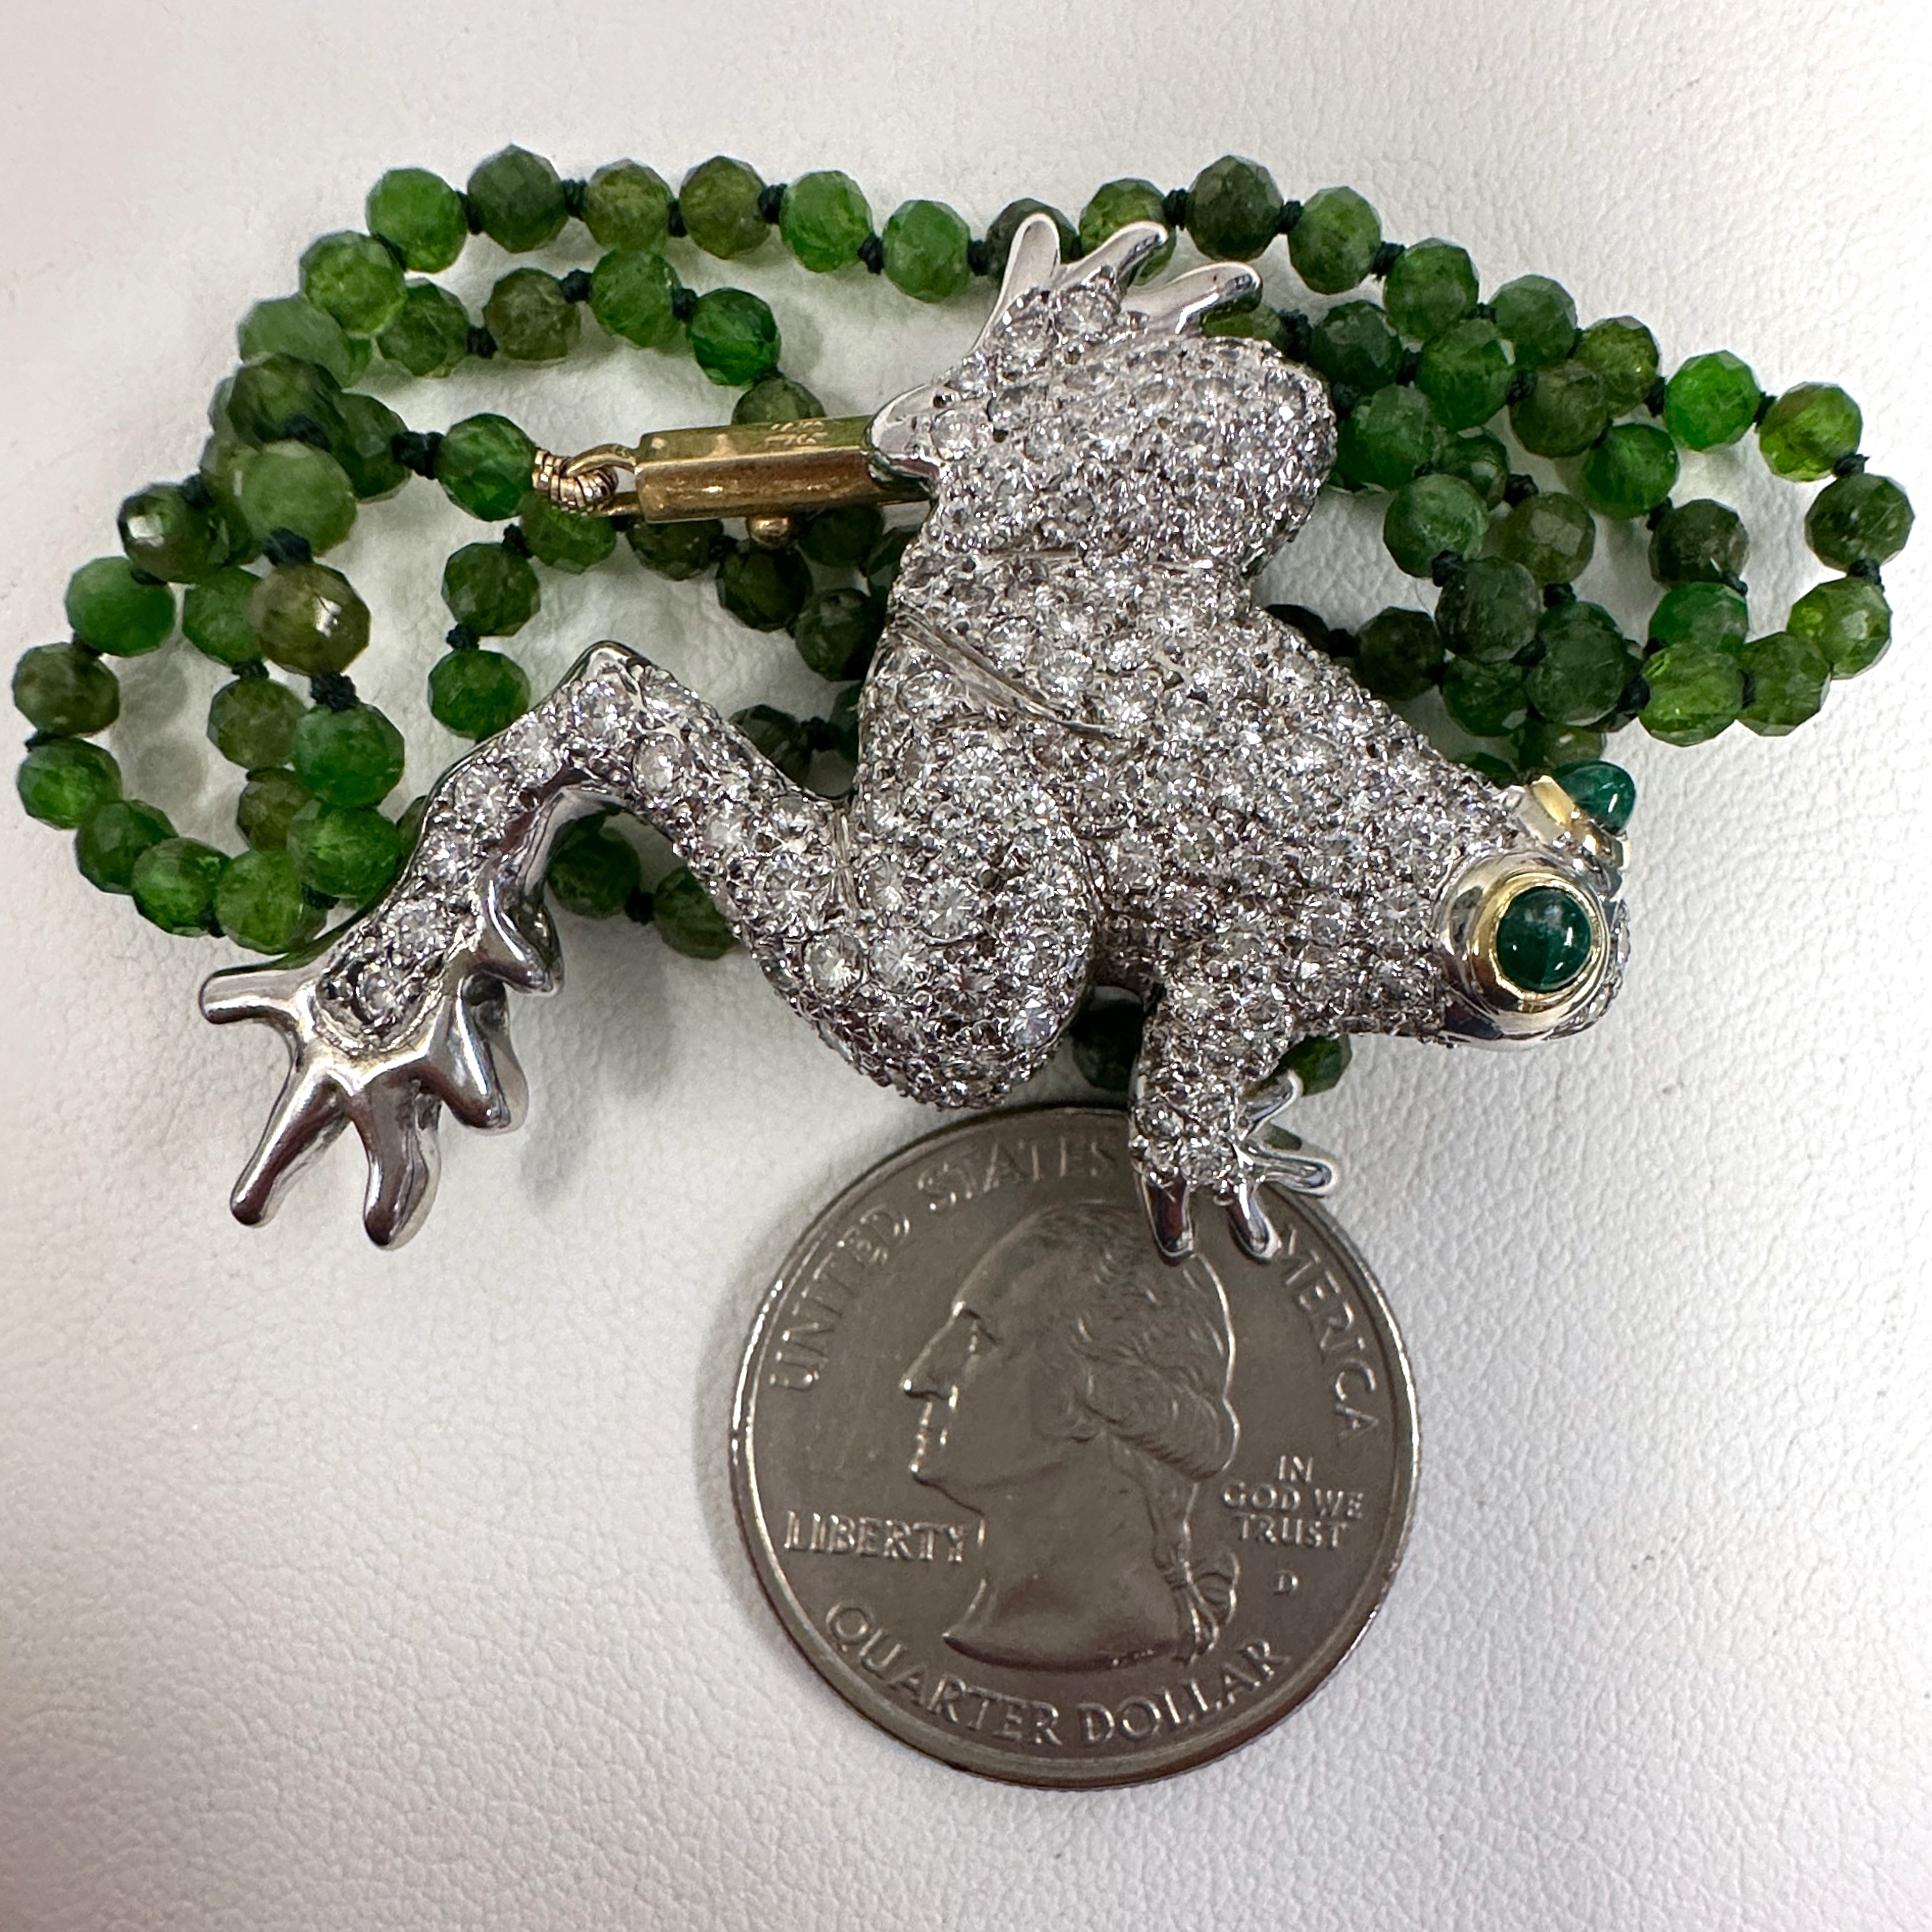 2.5 Carat Pavé Diamond Frog Pendant in White Gold on Chrome Diopside Bead Chain For Sale 5